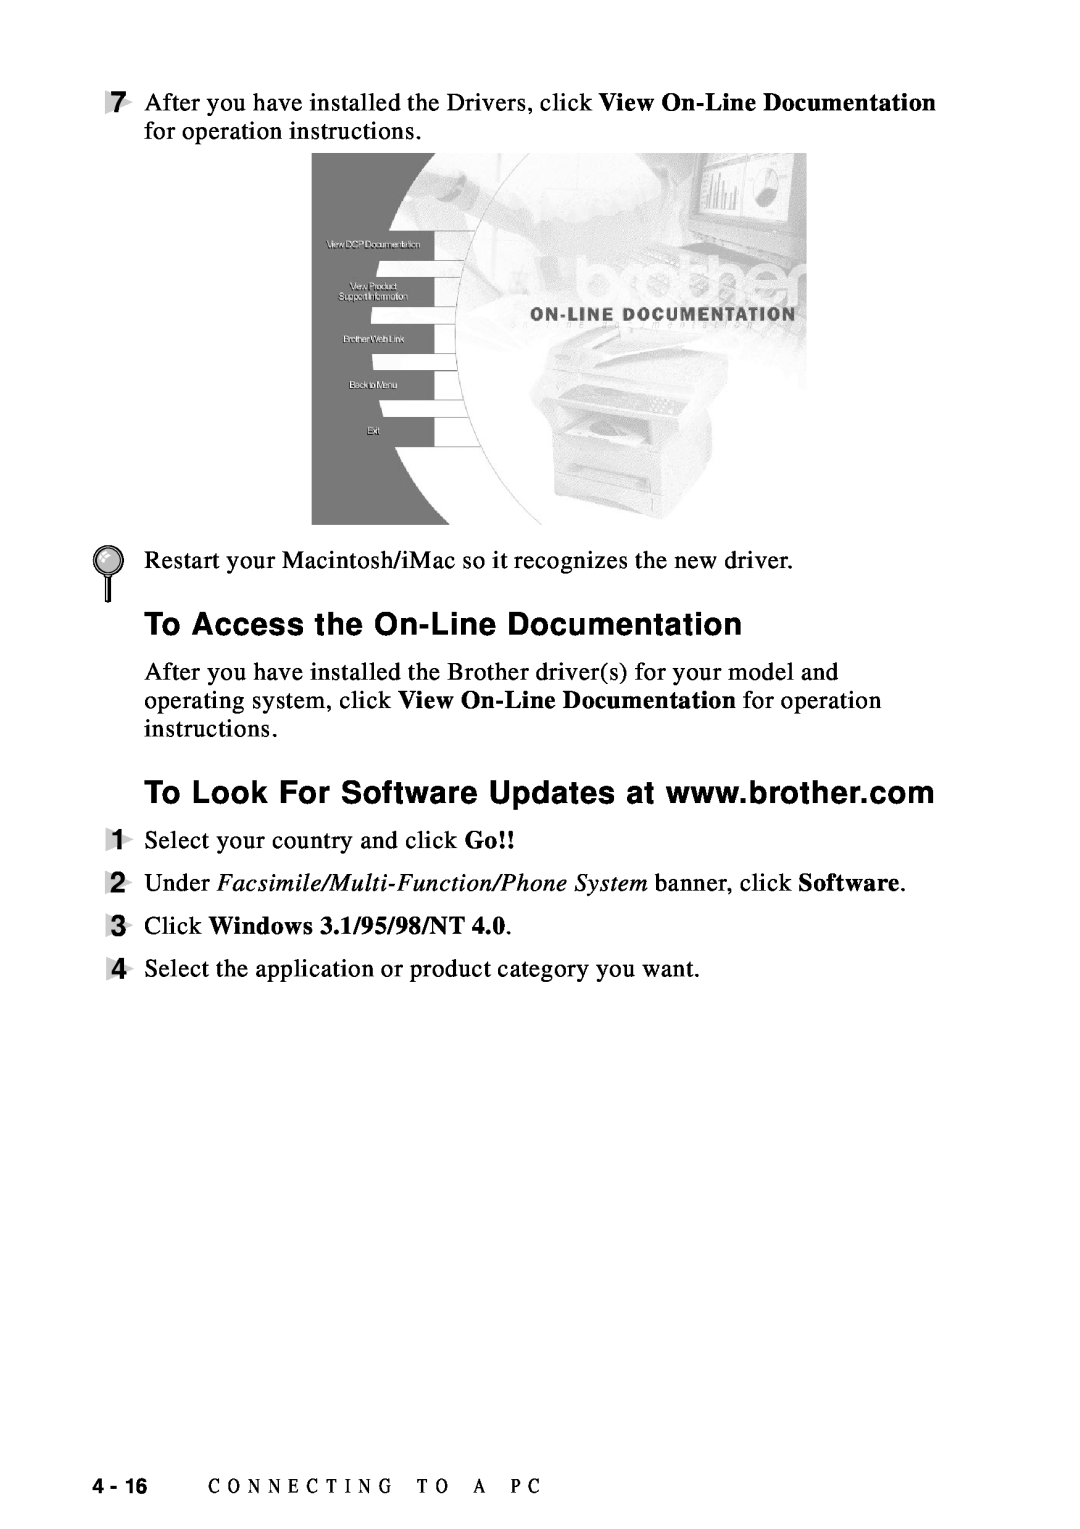 Brother DCP1200 To Access the On-Line Documentation, Under Facsimile/Multi-Function/Phone System banner, click Software 